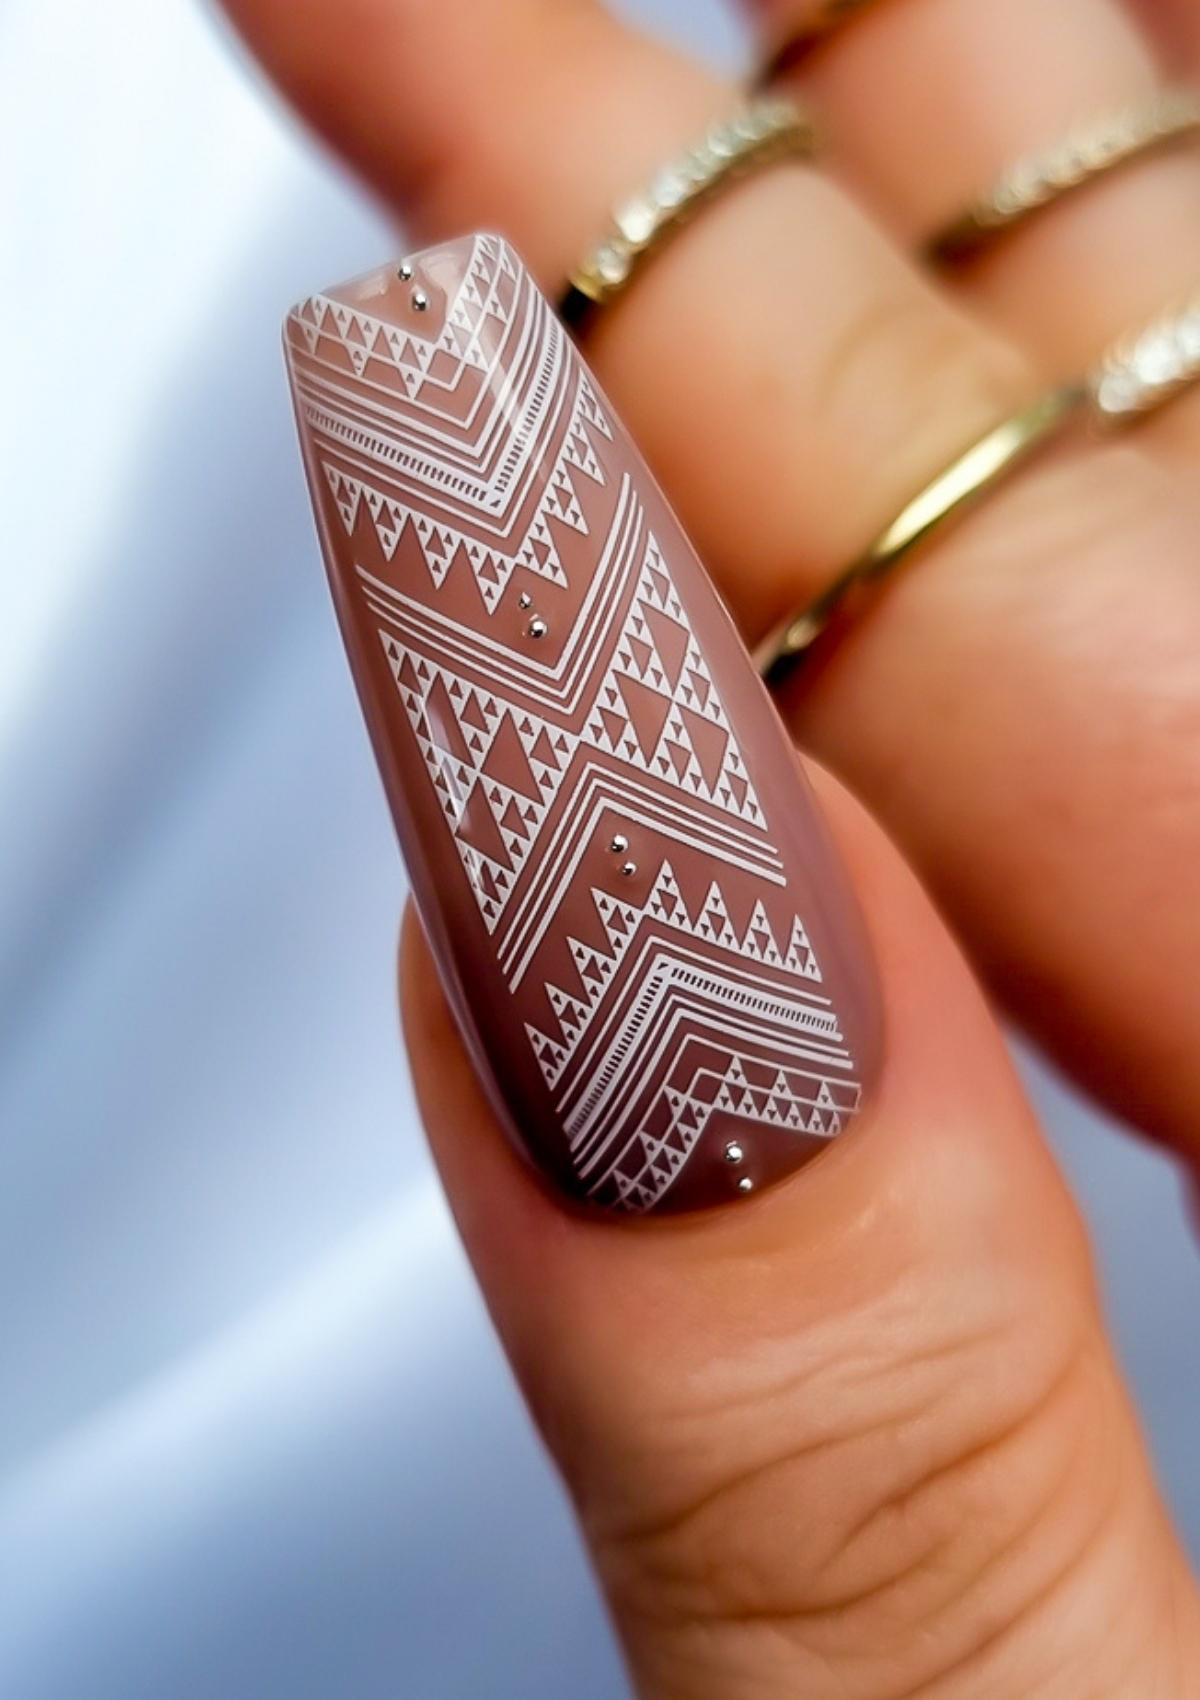 Long coffin shaped thumb nail in light brown with white Maori nail art. Nail art design in Taniko Hou pattern by Adrienne Whitewood.  